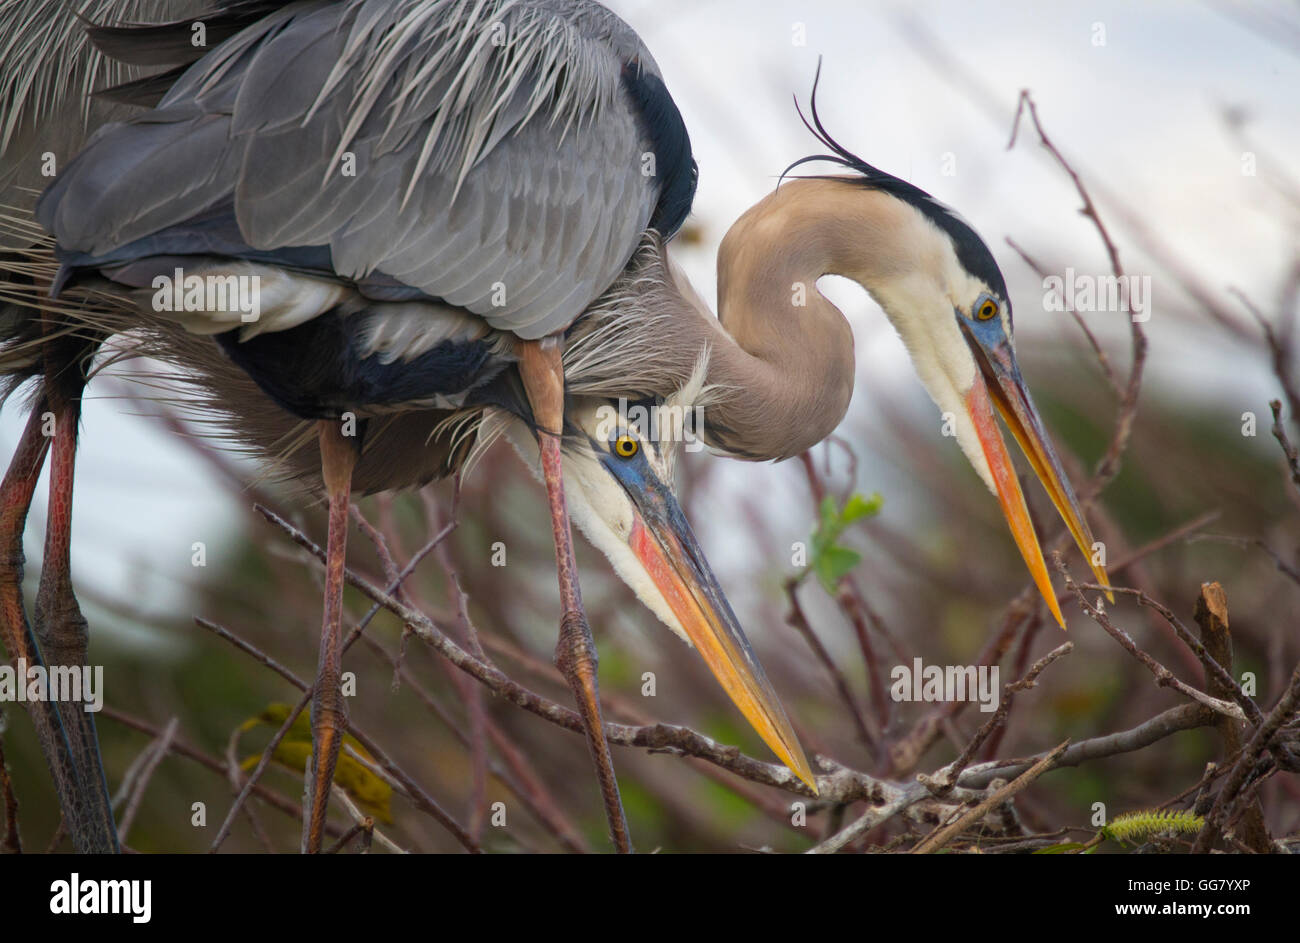 Great Blue Heron Mating Pair Works together nest building Stock Photo